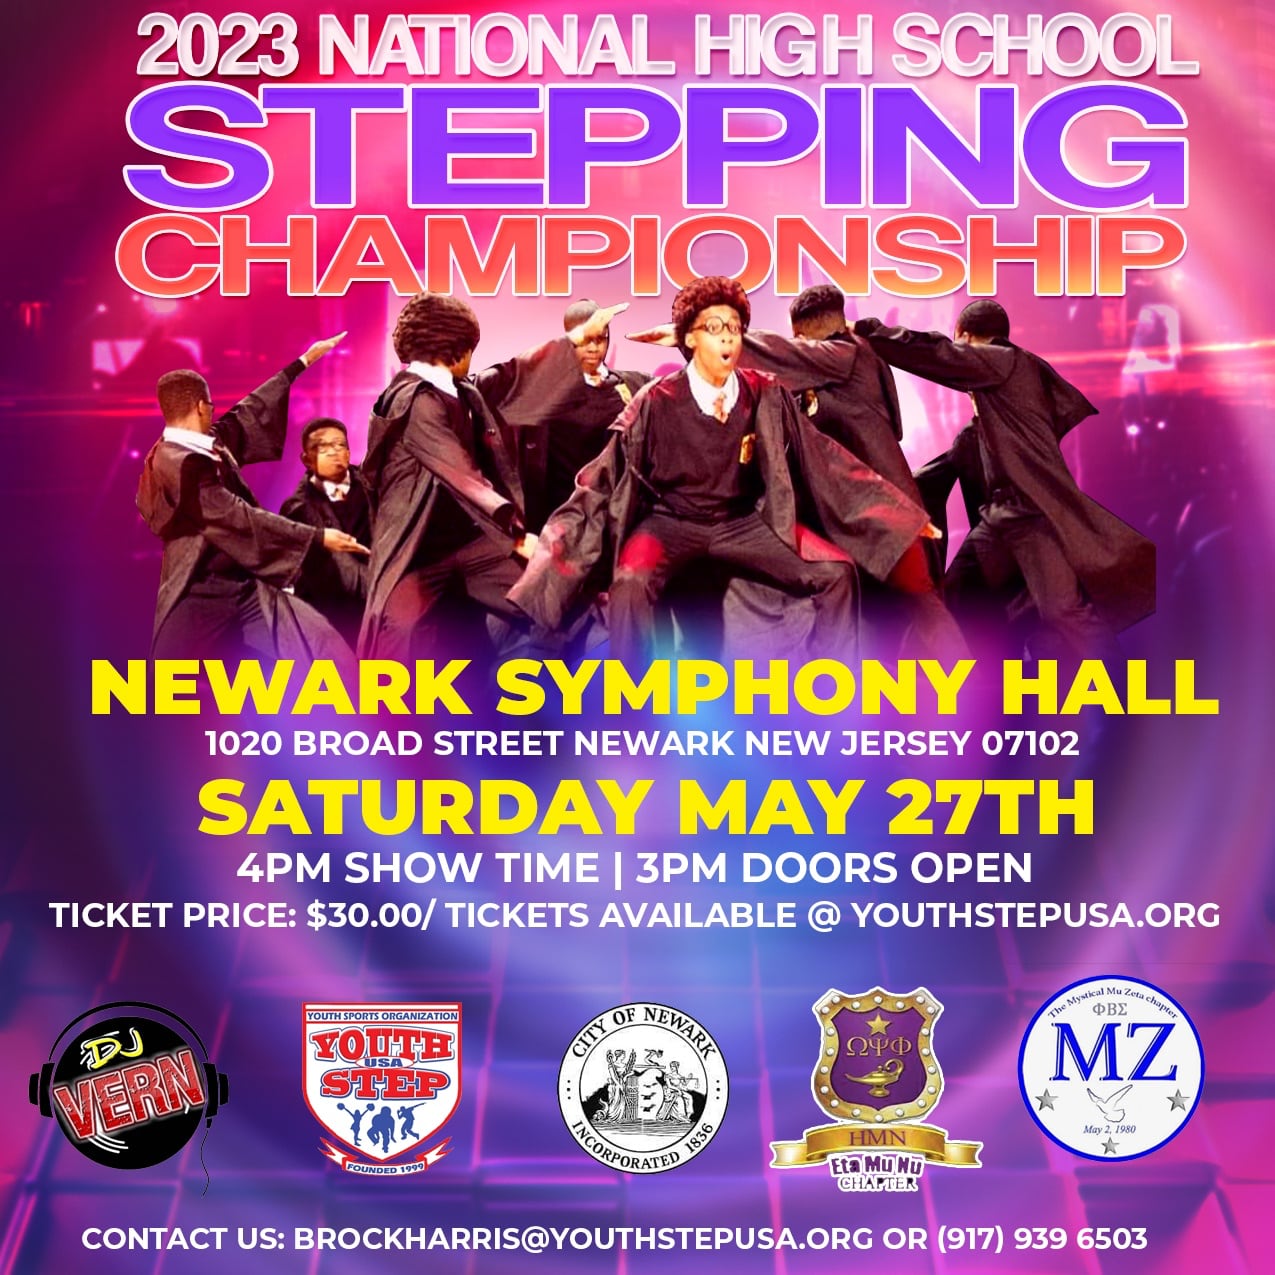 2023 National High School Stepping Championship Flyer - May 27th 3pm at Newark Symphony Hall